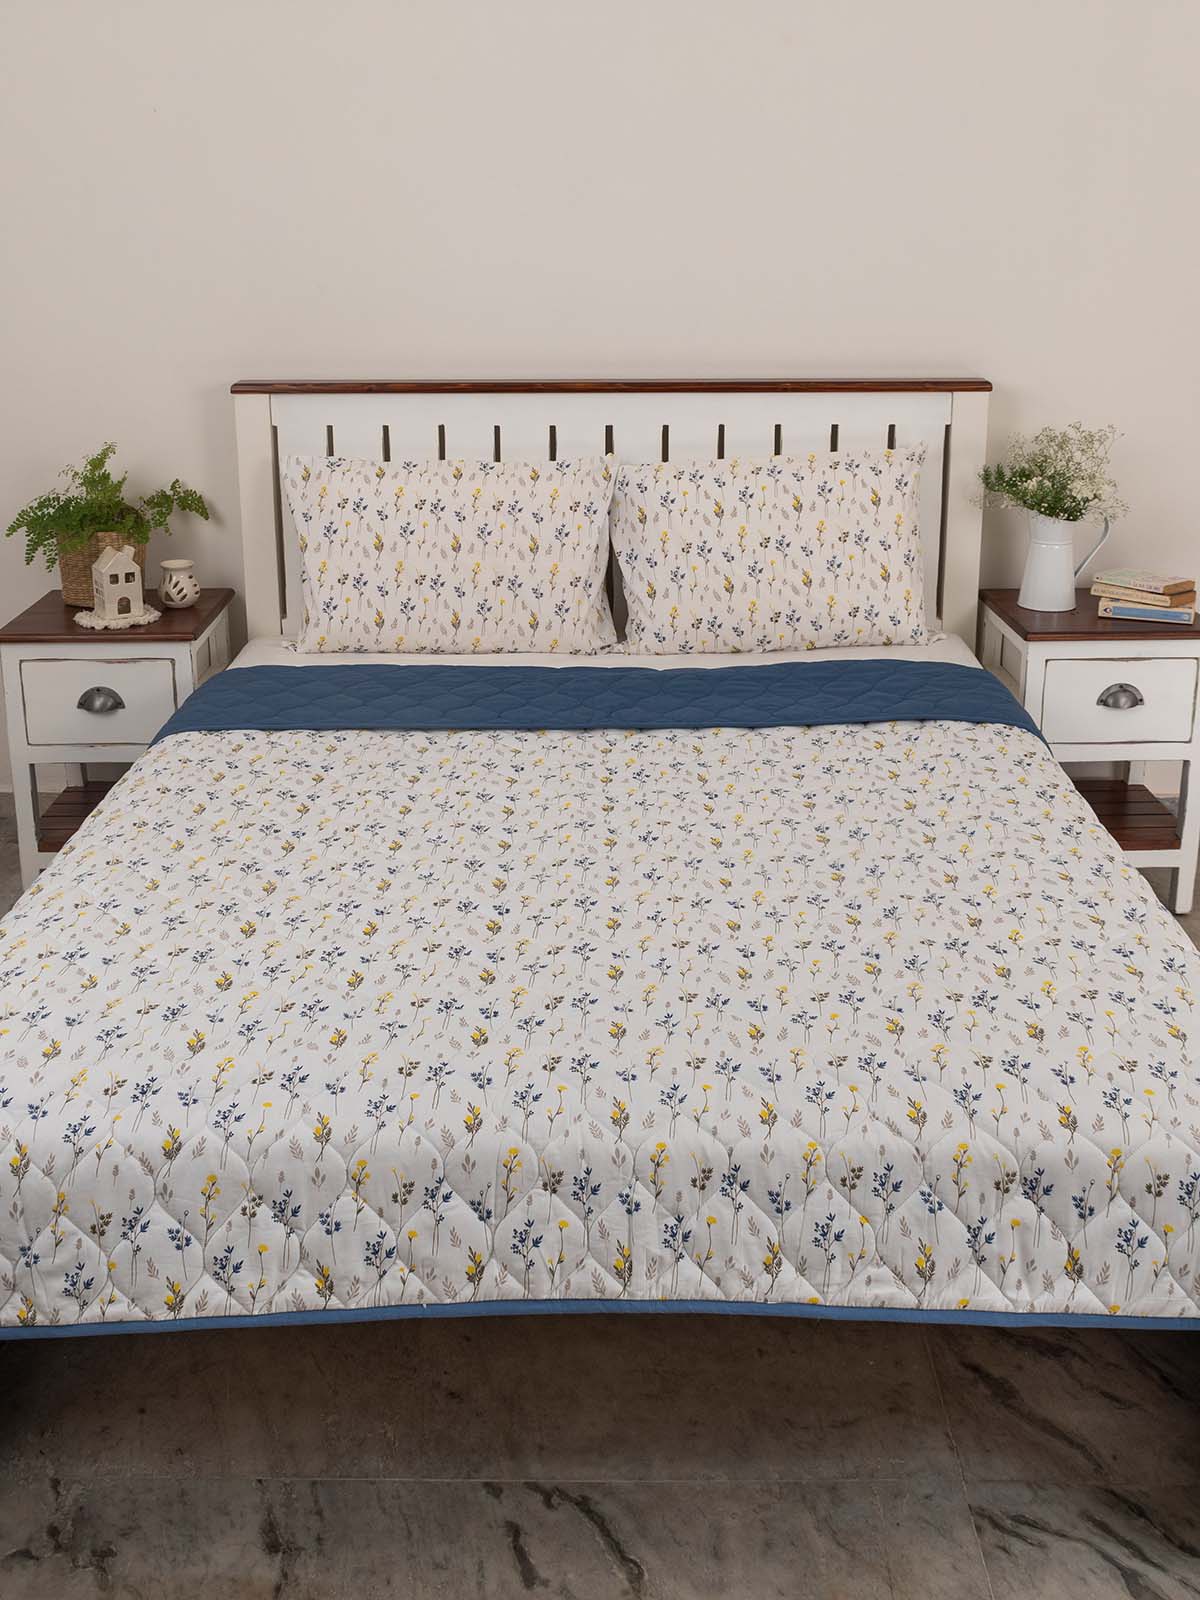 Blooming Meadows Printed Cotton Quilt - Multicolor